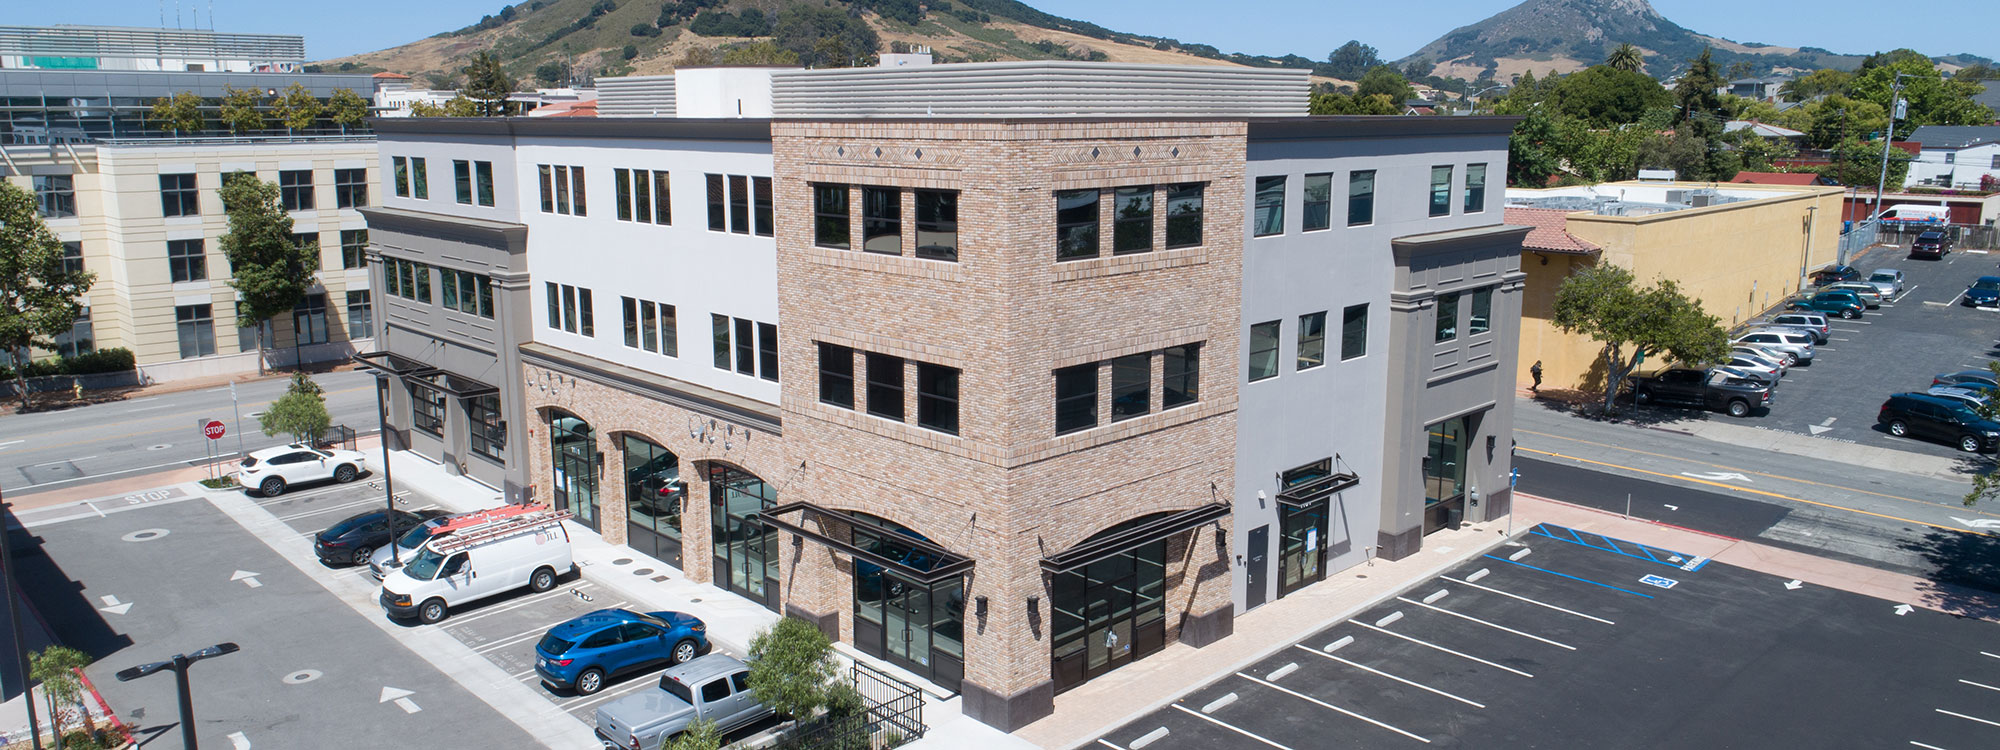 Mixed-use construction services - quality builder - Paso Robles, California Construction Firm - JW Design & Construction